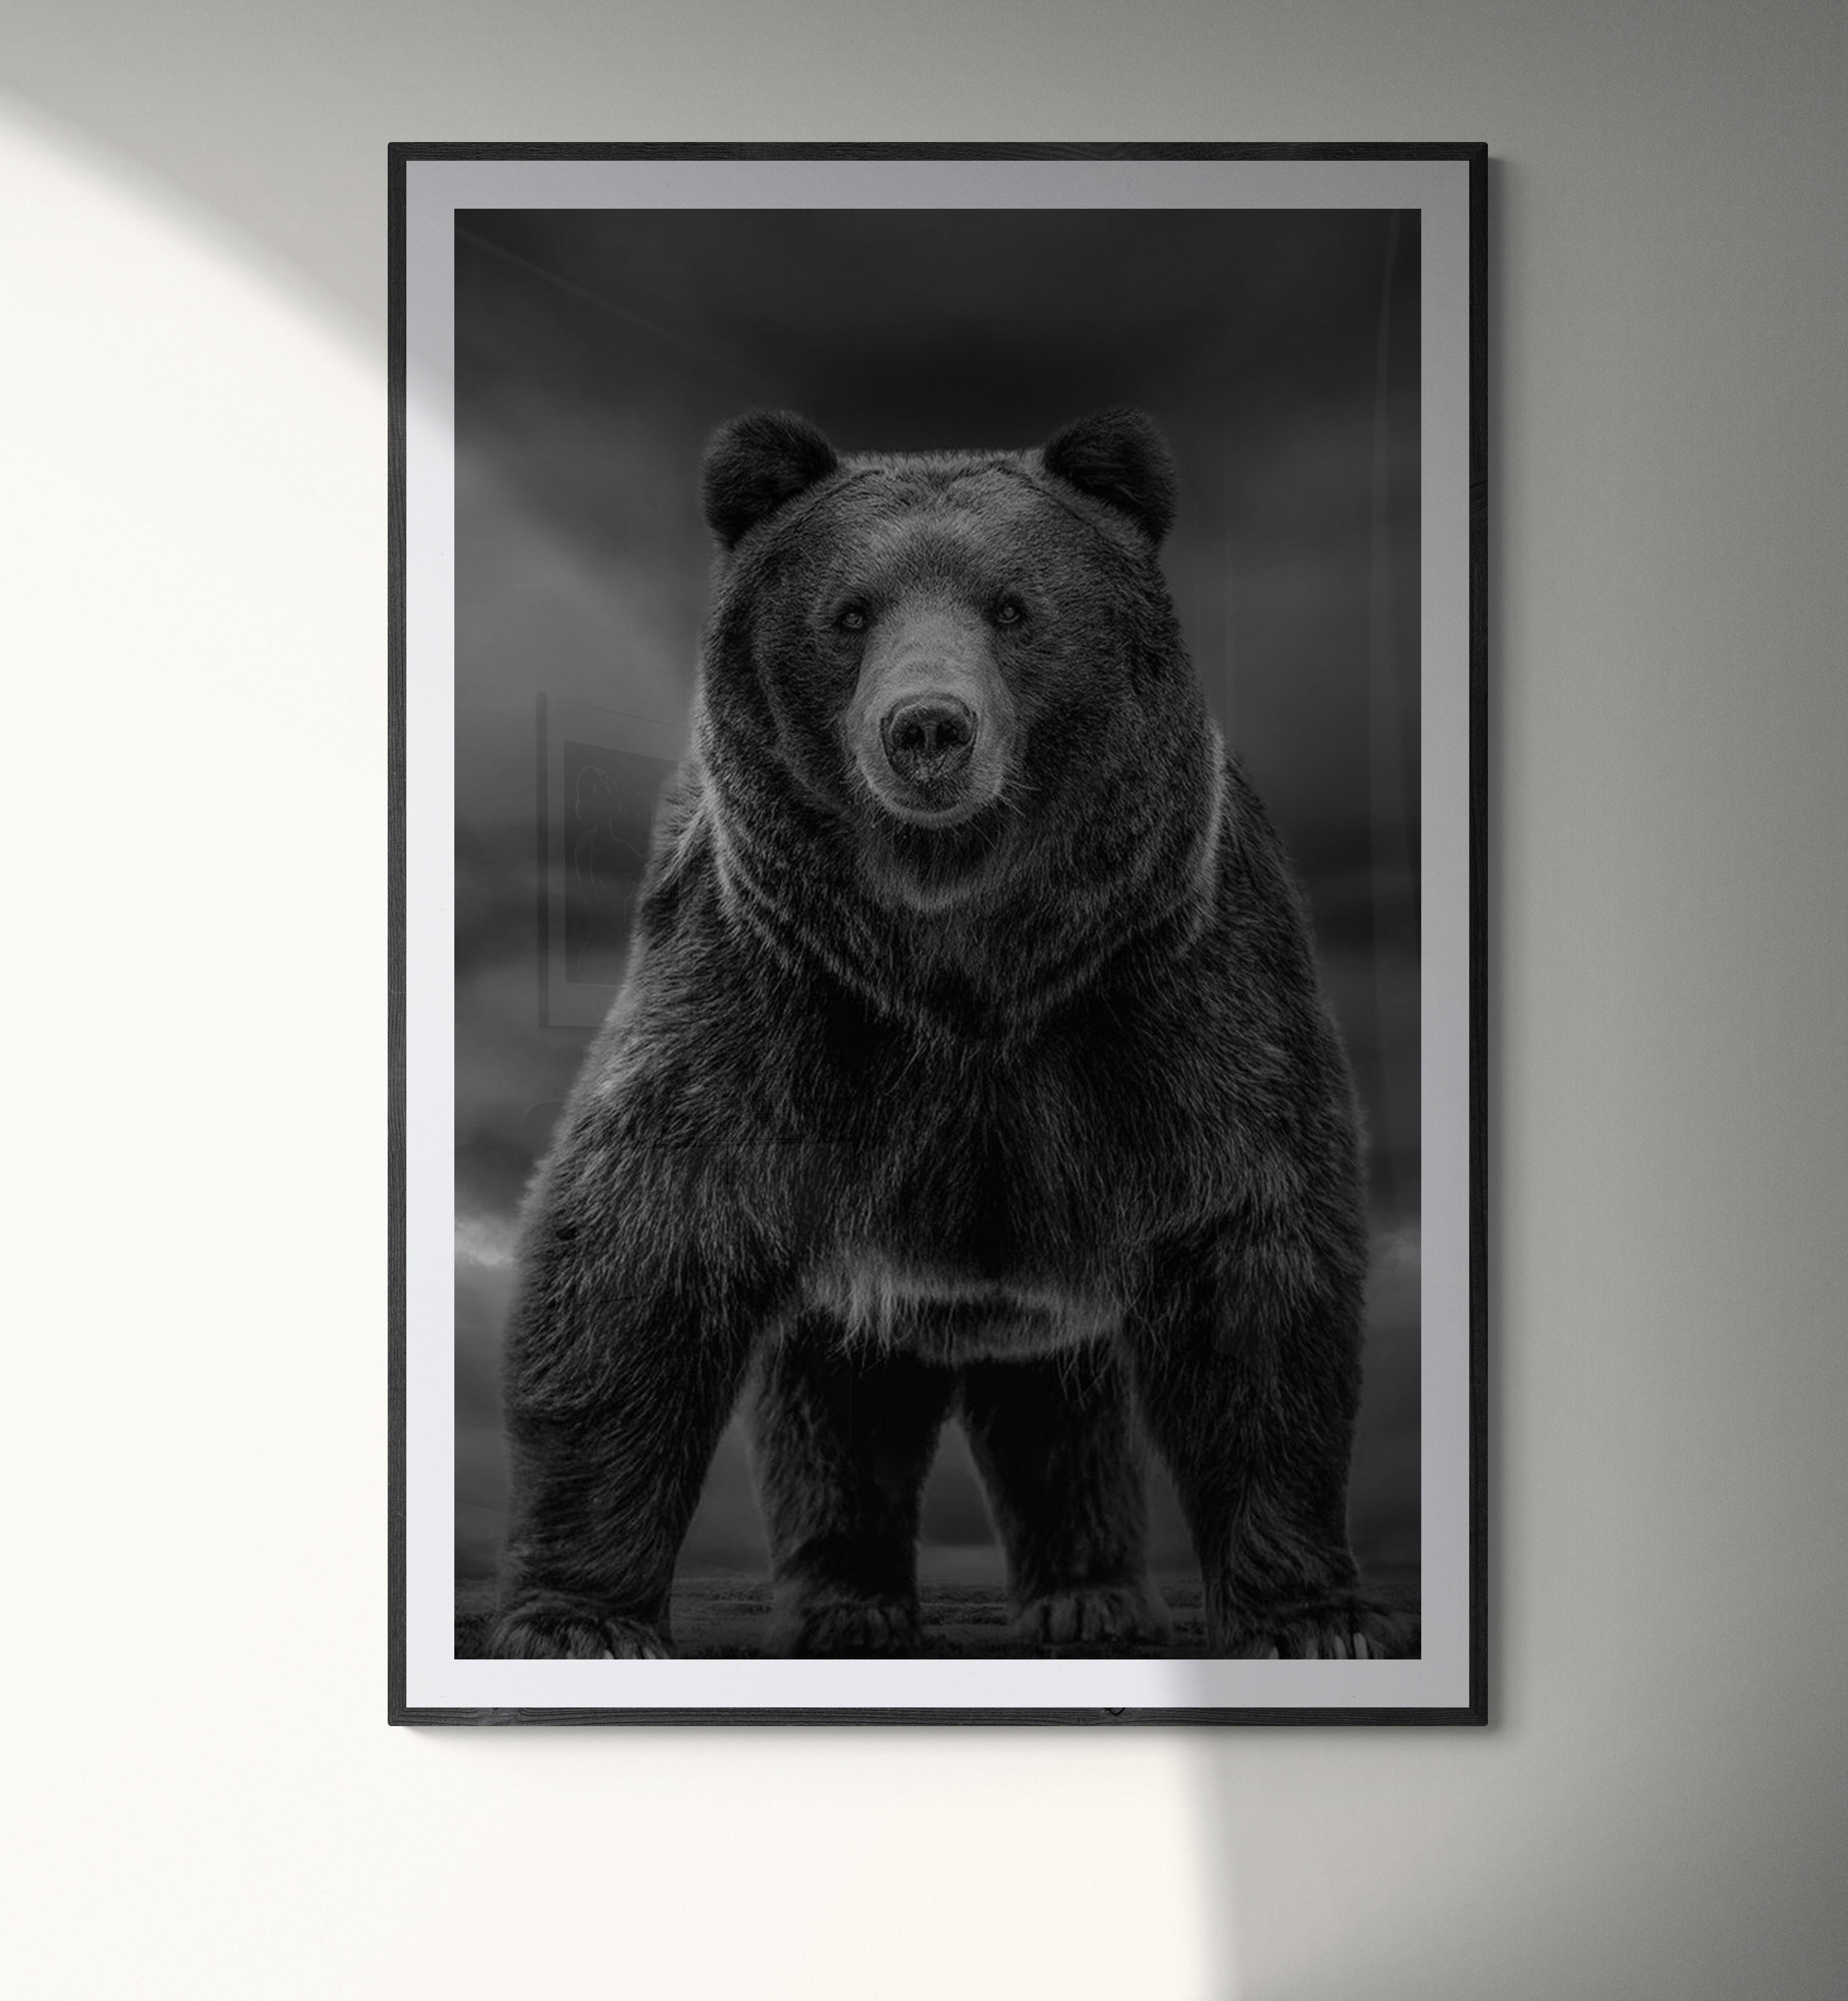 Times Like These 60x40 Black & White Photography, Kodiak, Bear Grizzly Unsigned  For Sale 1